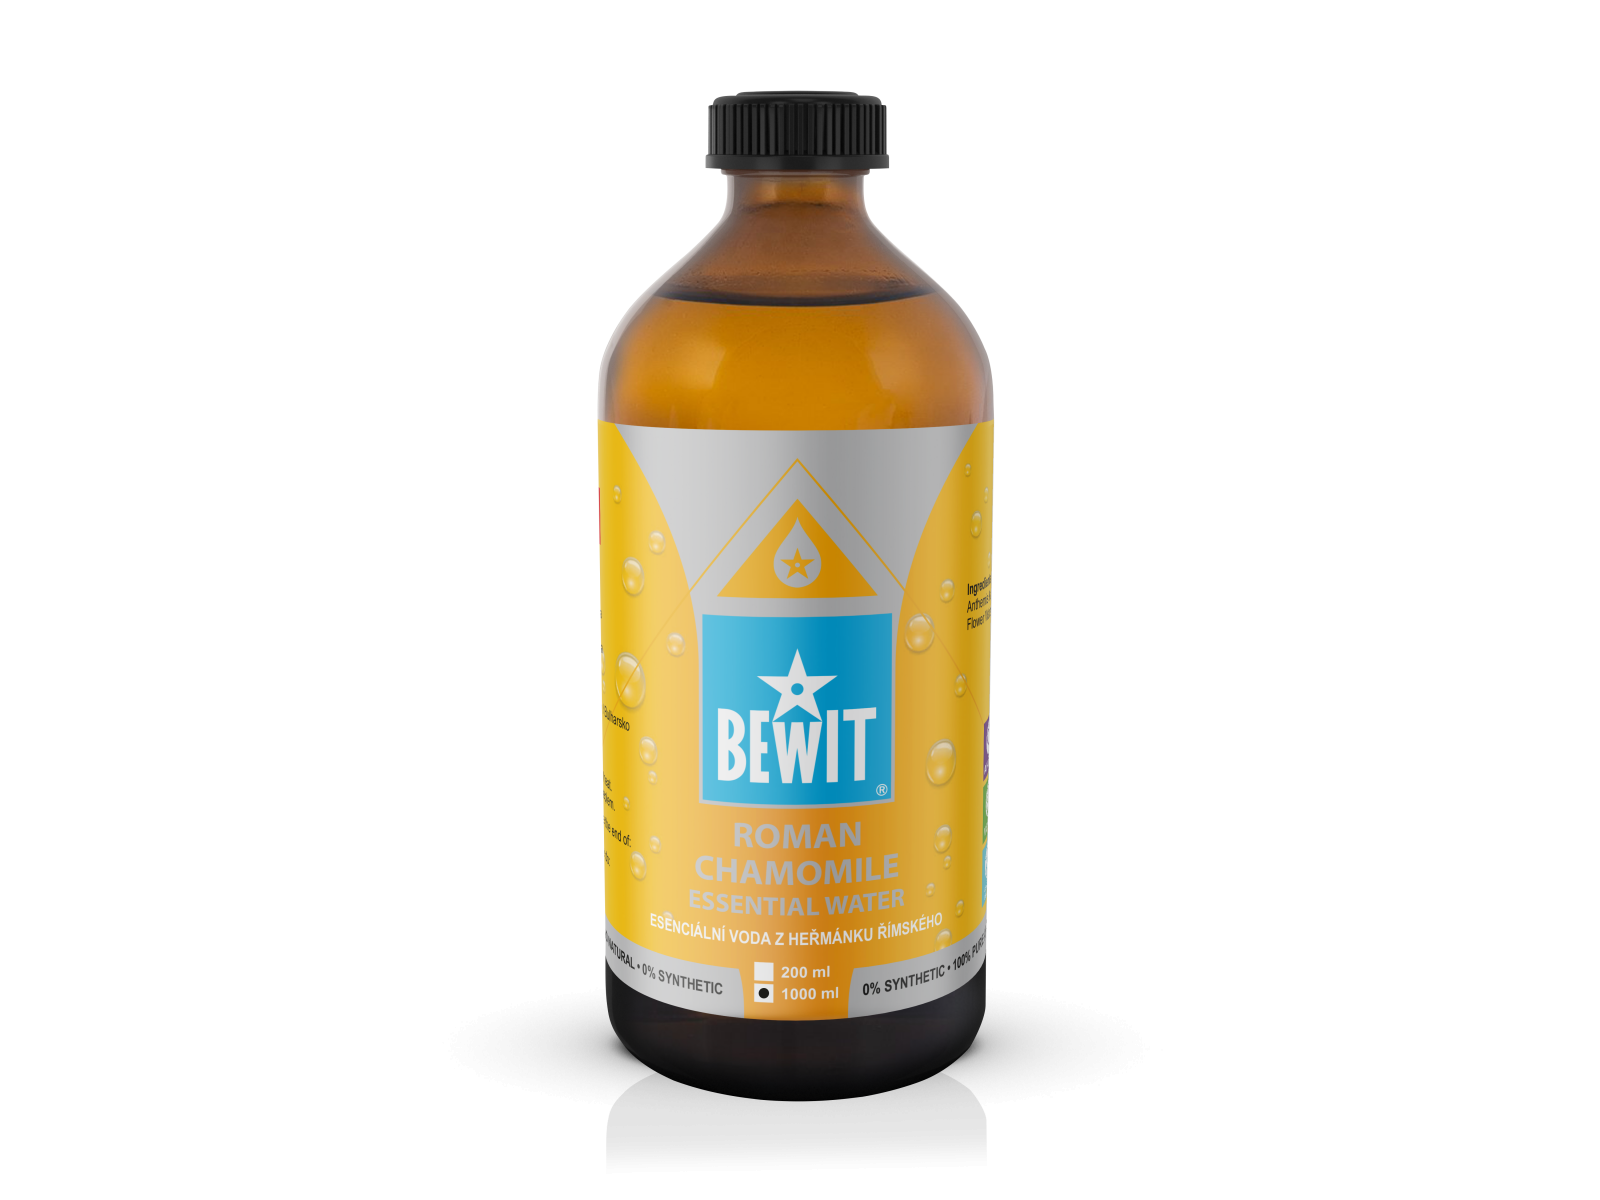 BEWIT Roman chamomile essential water - 100% NATURAL HYDROLYTE - 3